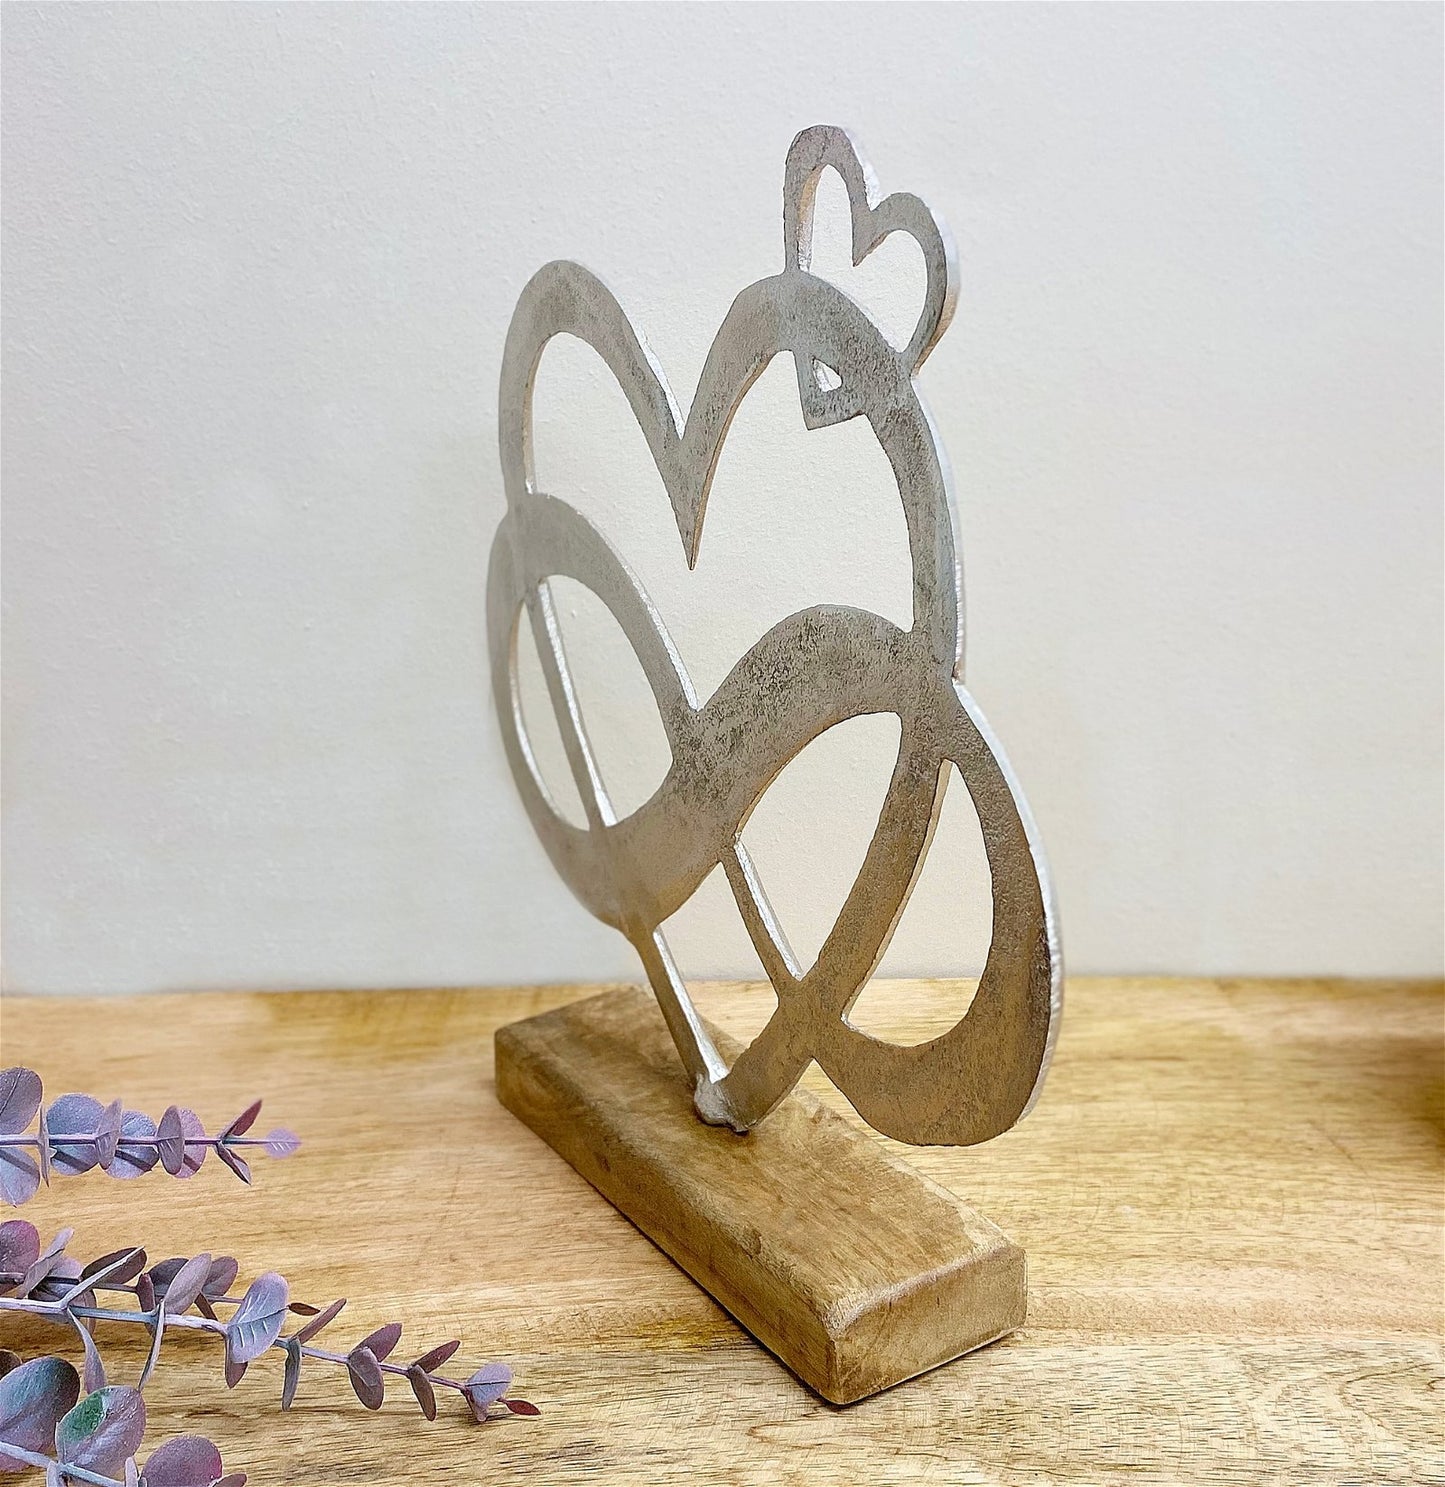 Metal Silver Entwined Hearts On A Wooden Base Large